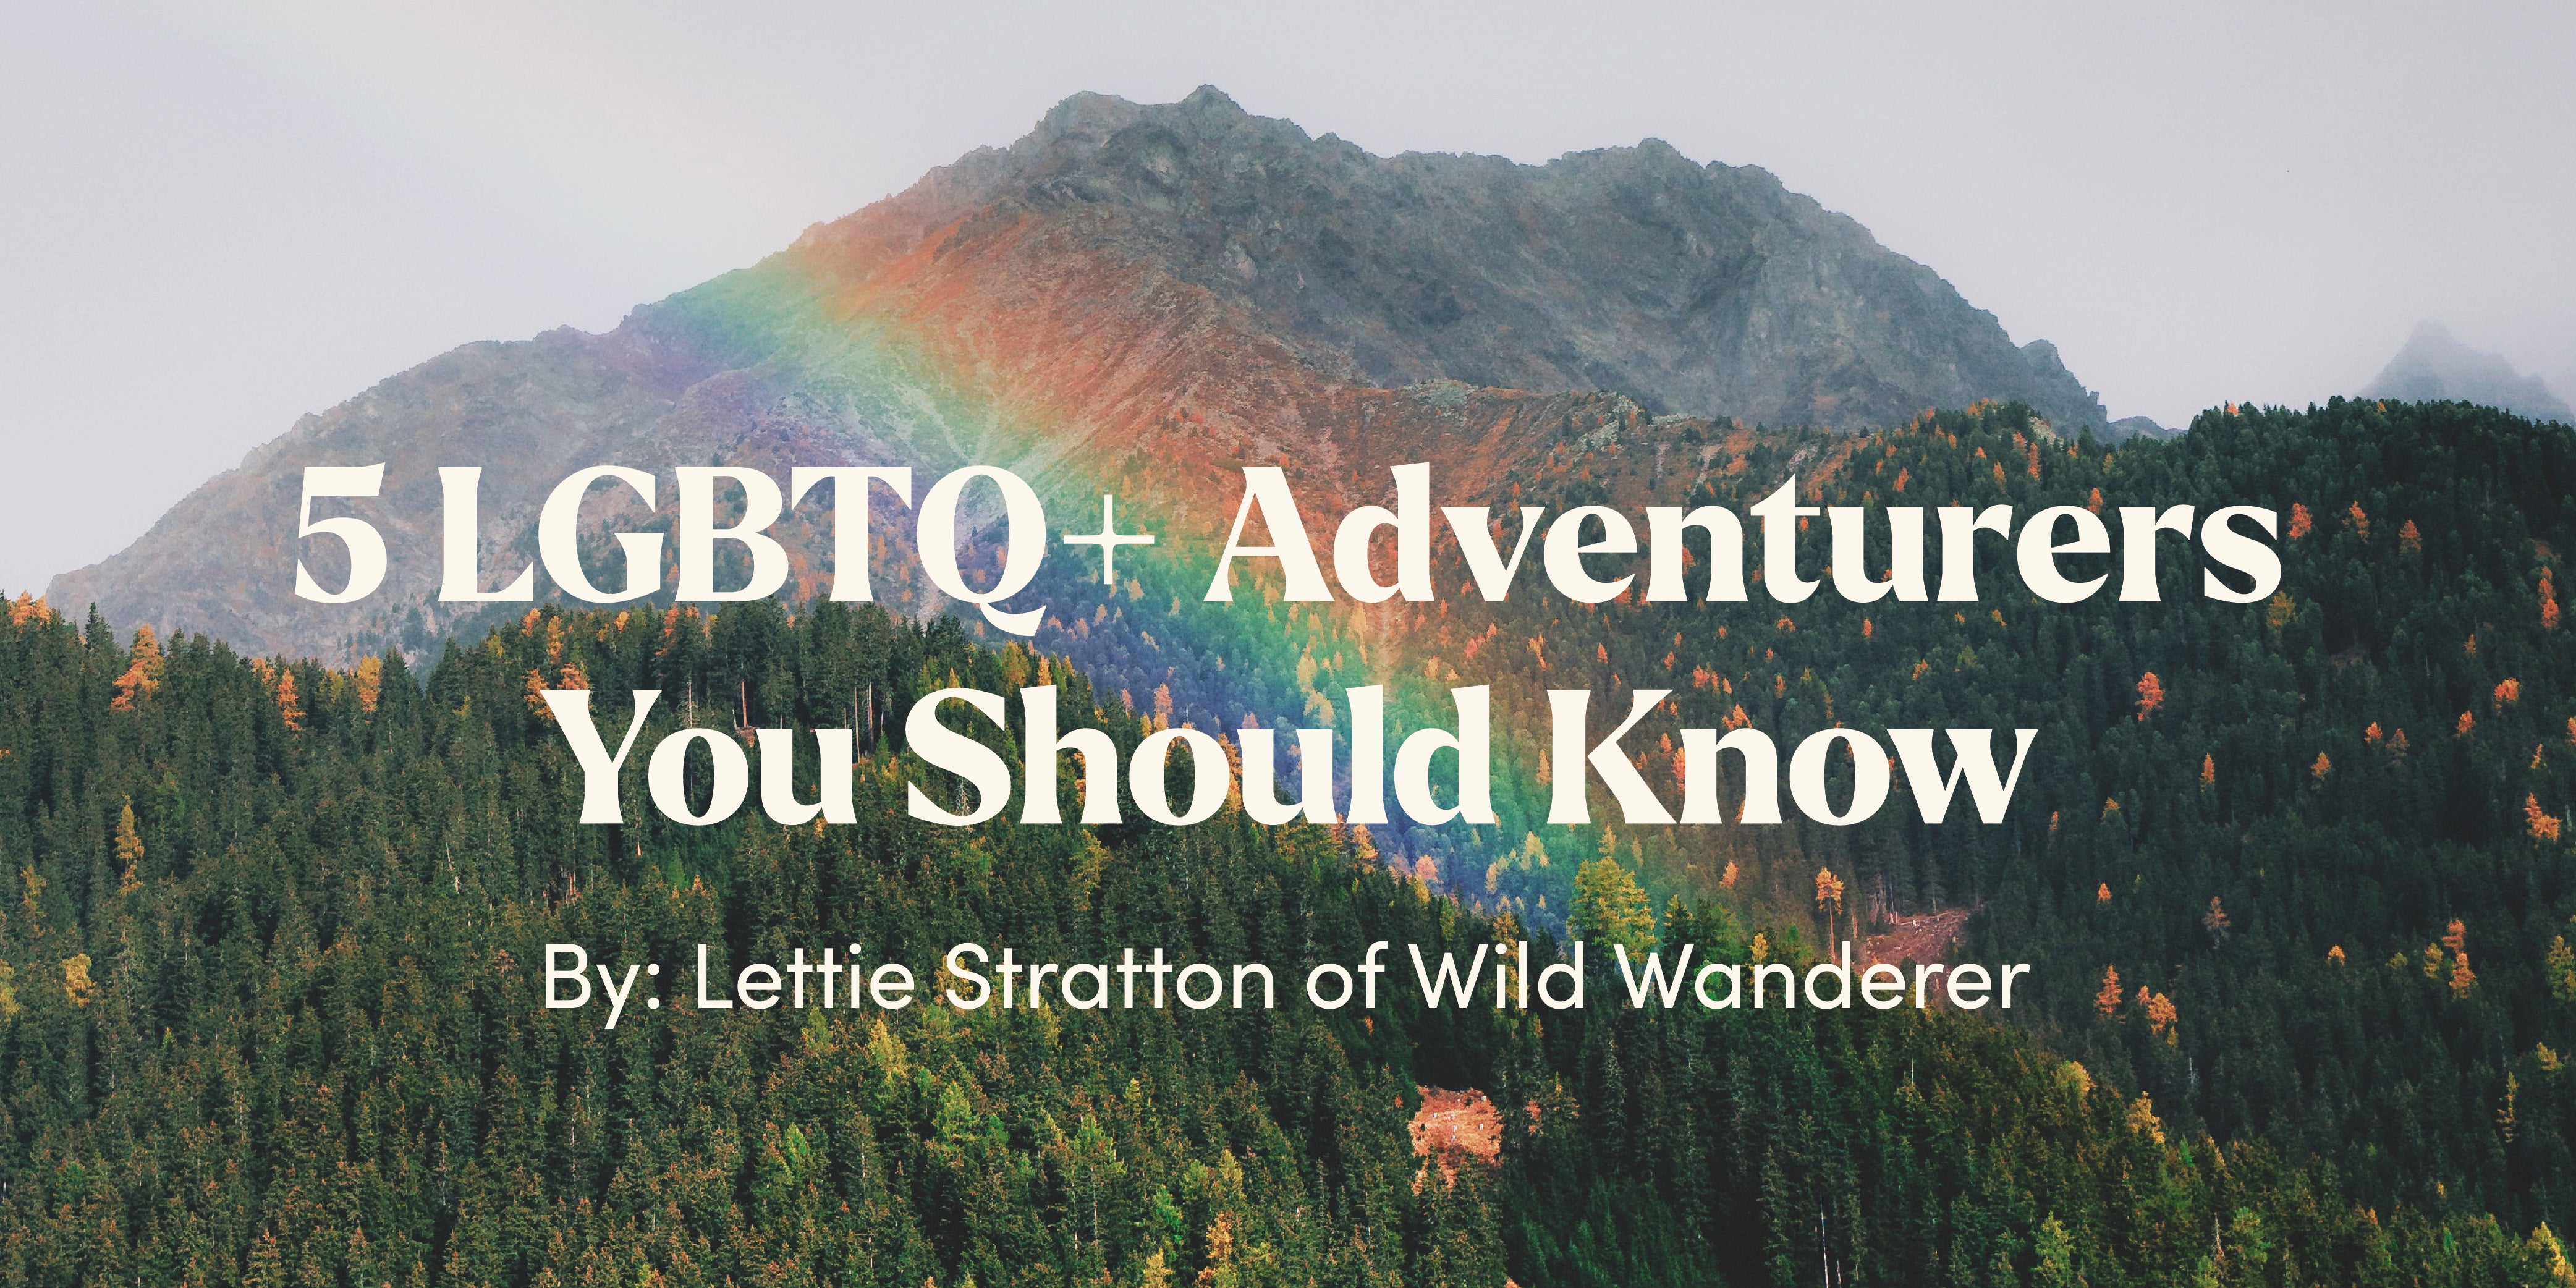 5 LGBTQ+ Adventurers You Should Know